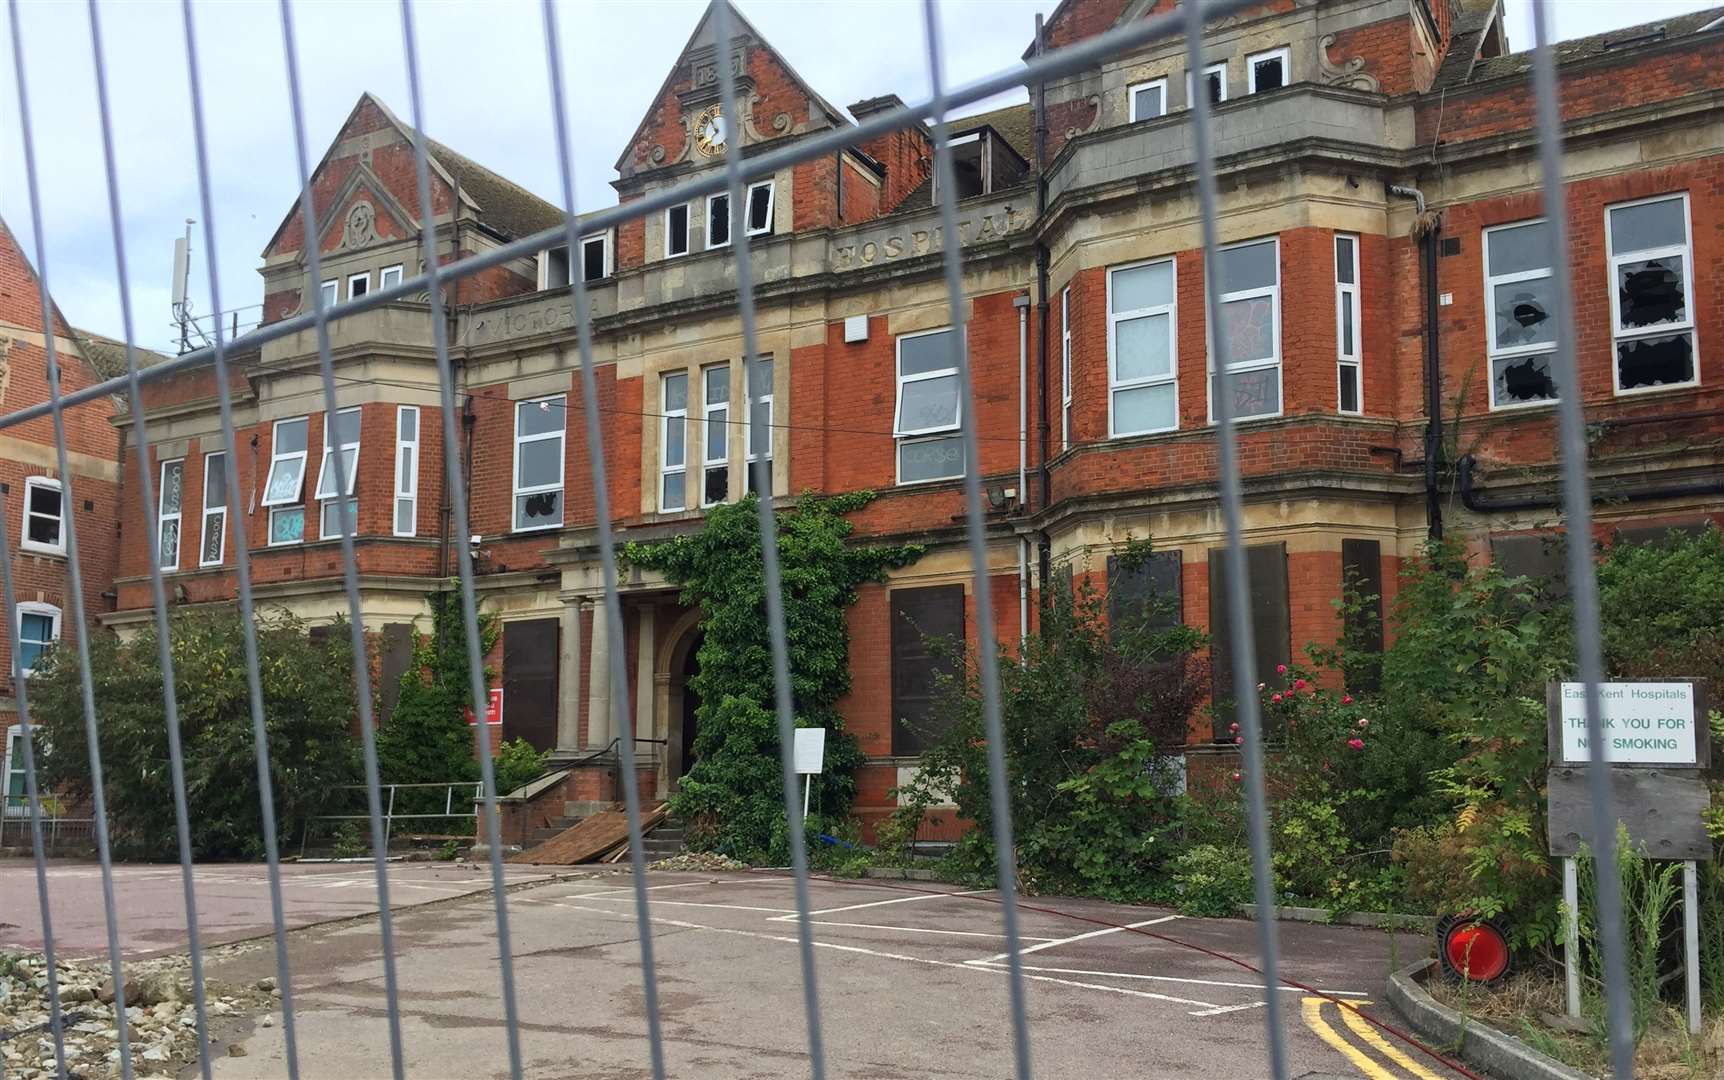 The Royal Victoria Hospital has been empty for years